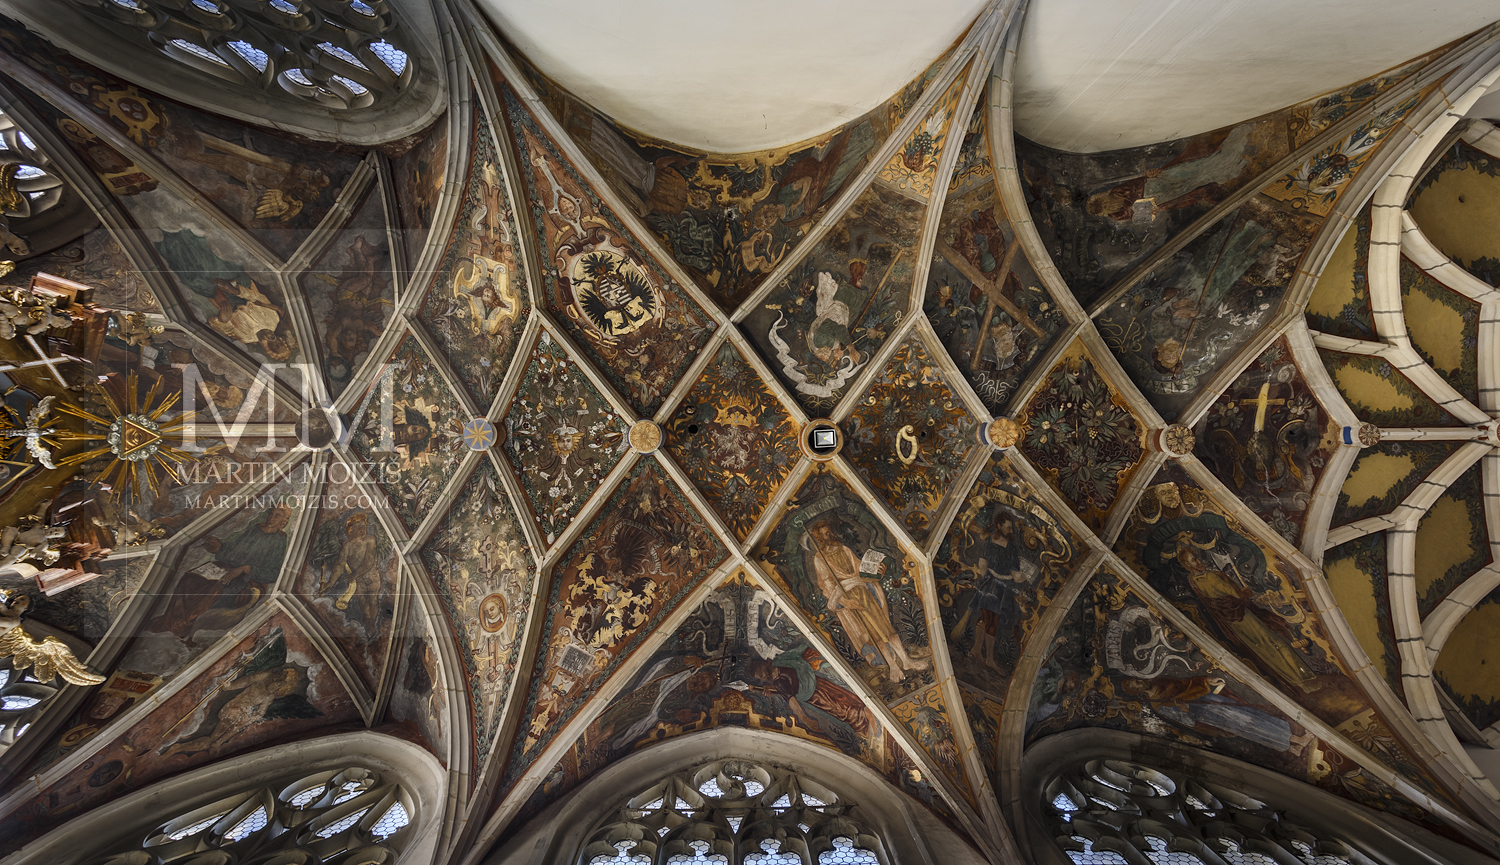 Church of st. Peter and Paul in Melnik. Ceiling over the main altar. Professional photography of architecture - interiors.